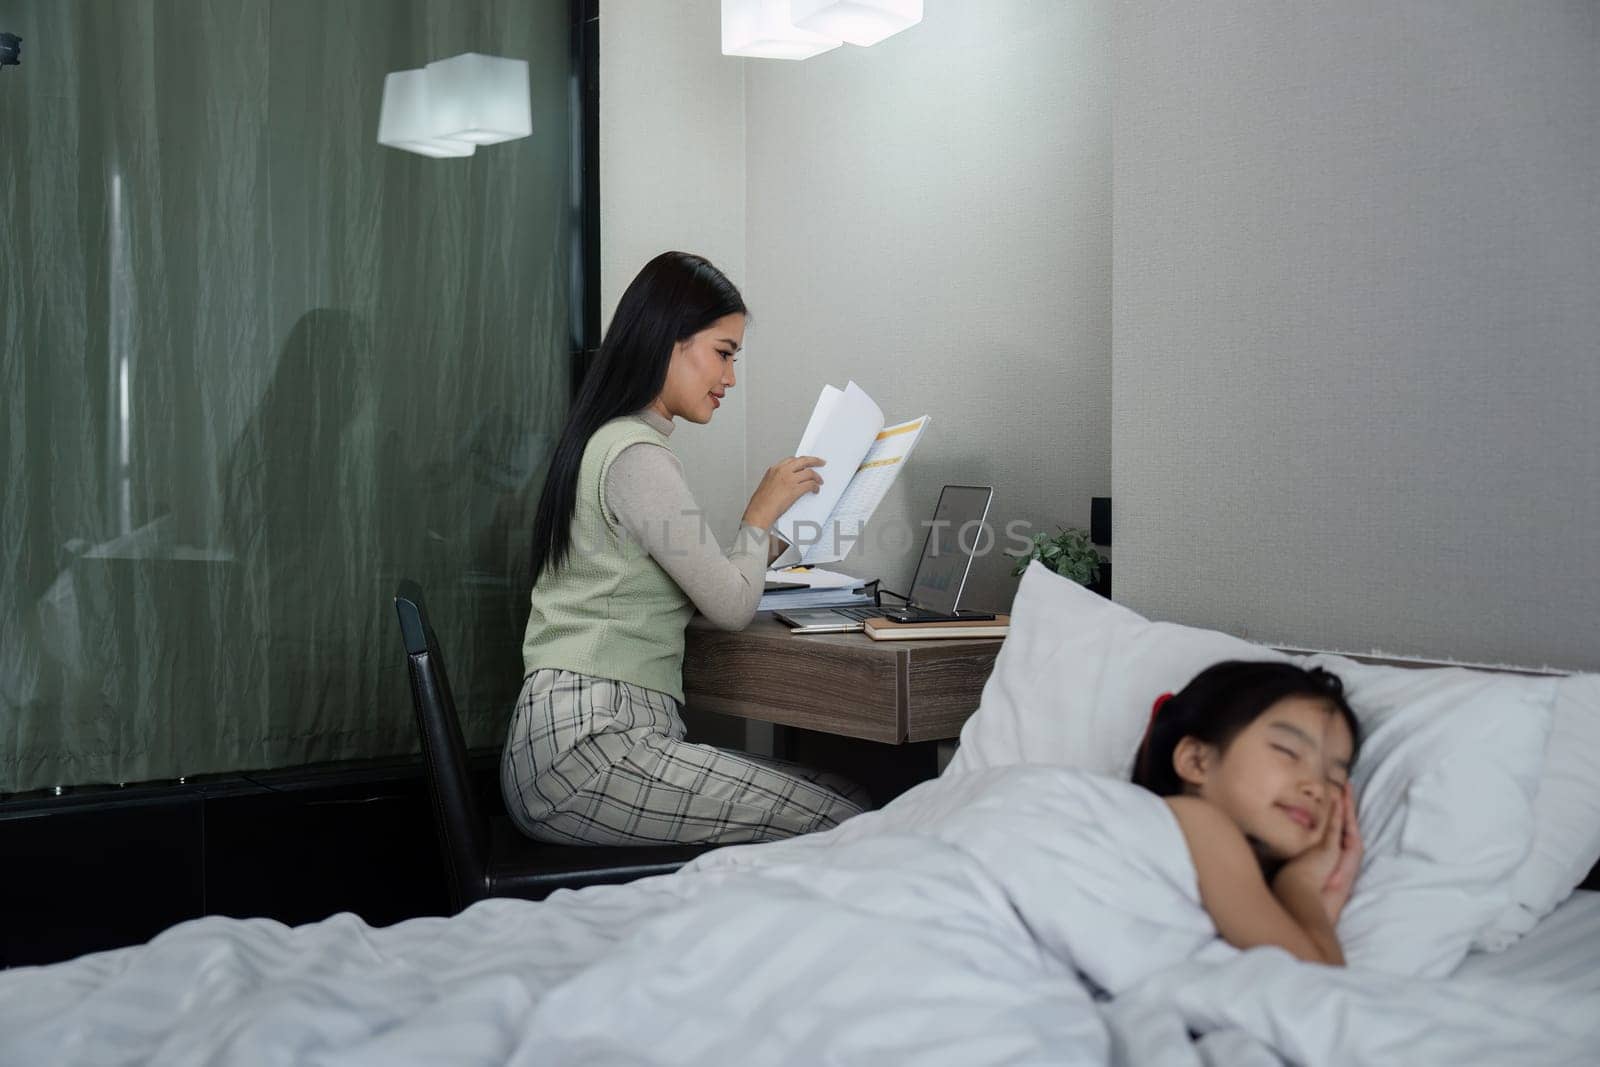 mother work late into the night after putting her child to sleep in the bedroom by itchaznong